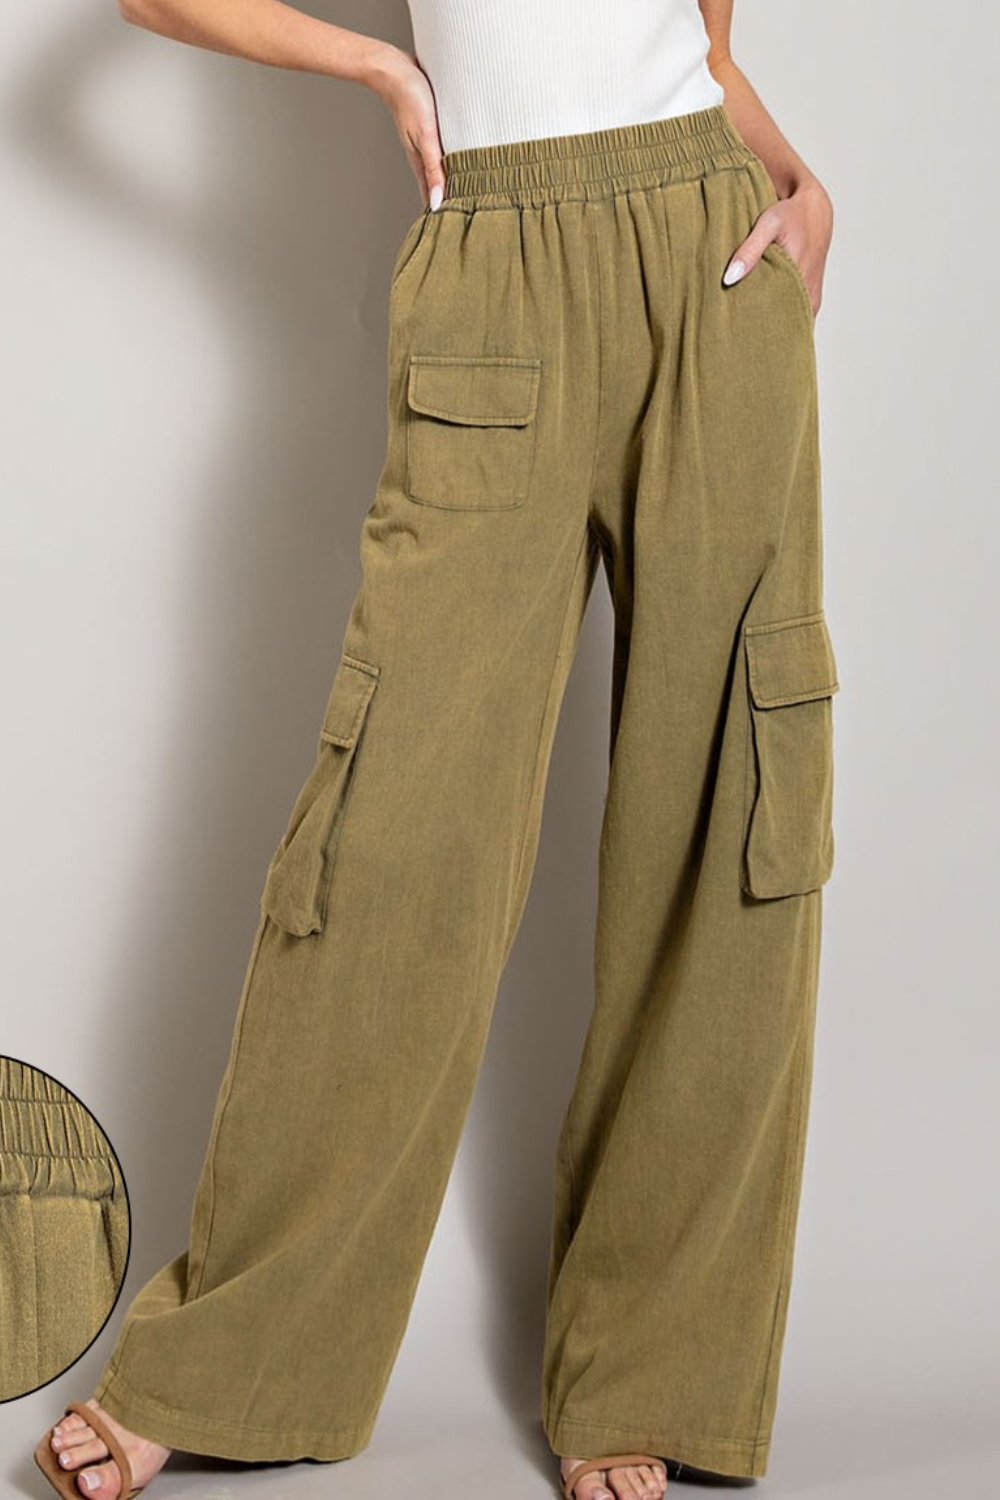 ee:some Mineral Washed Cargo Pockets Wide Leg Pants